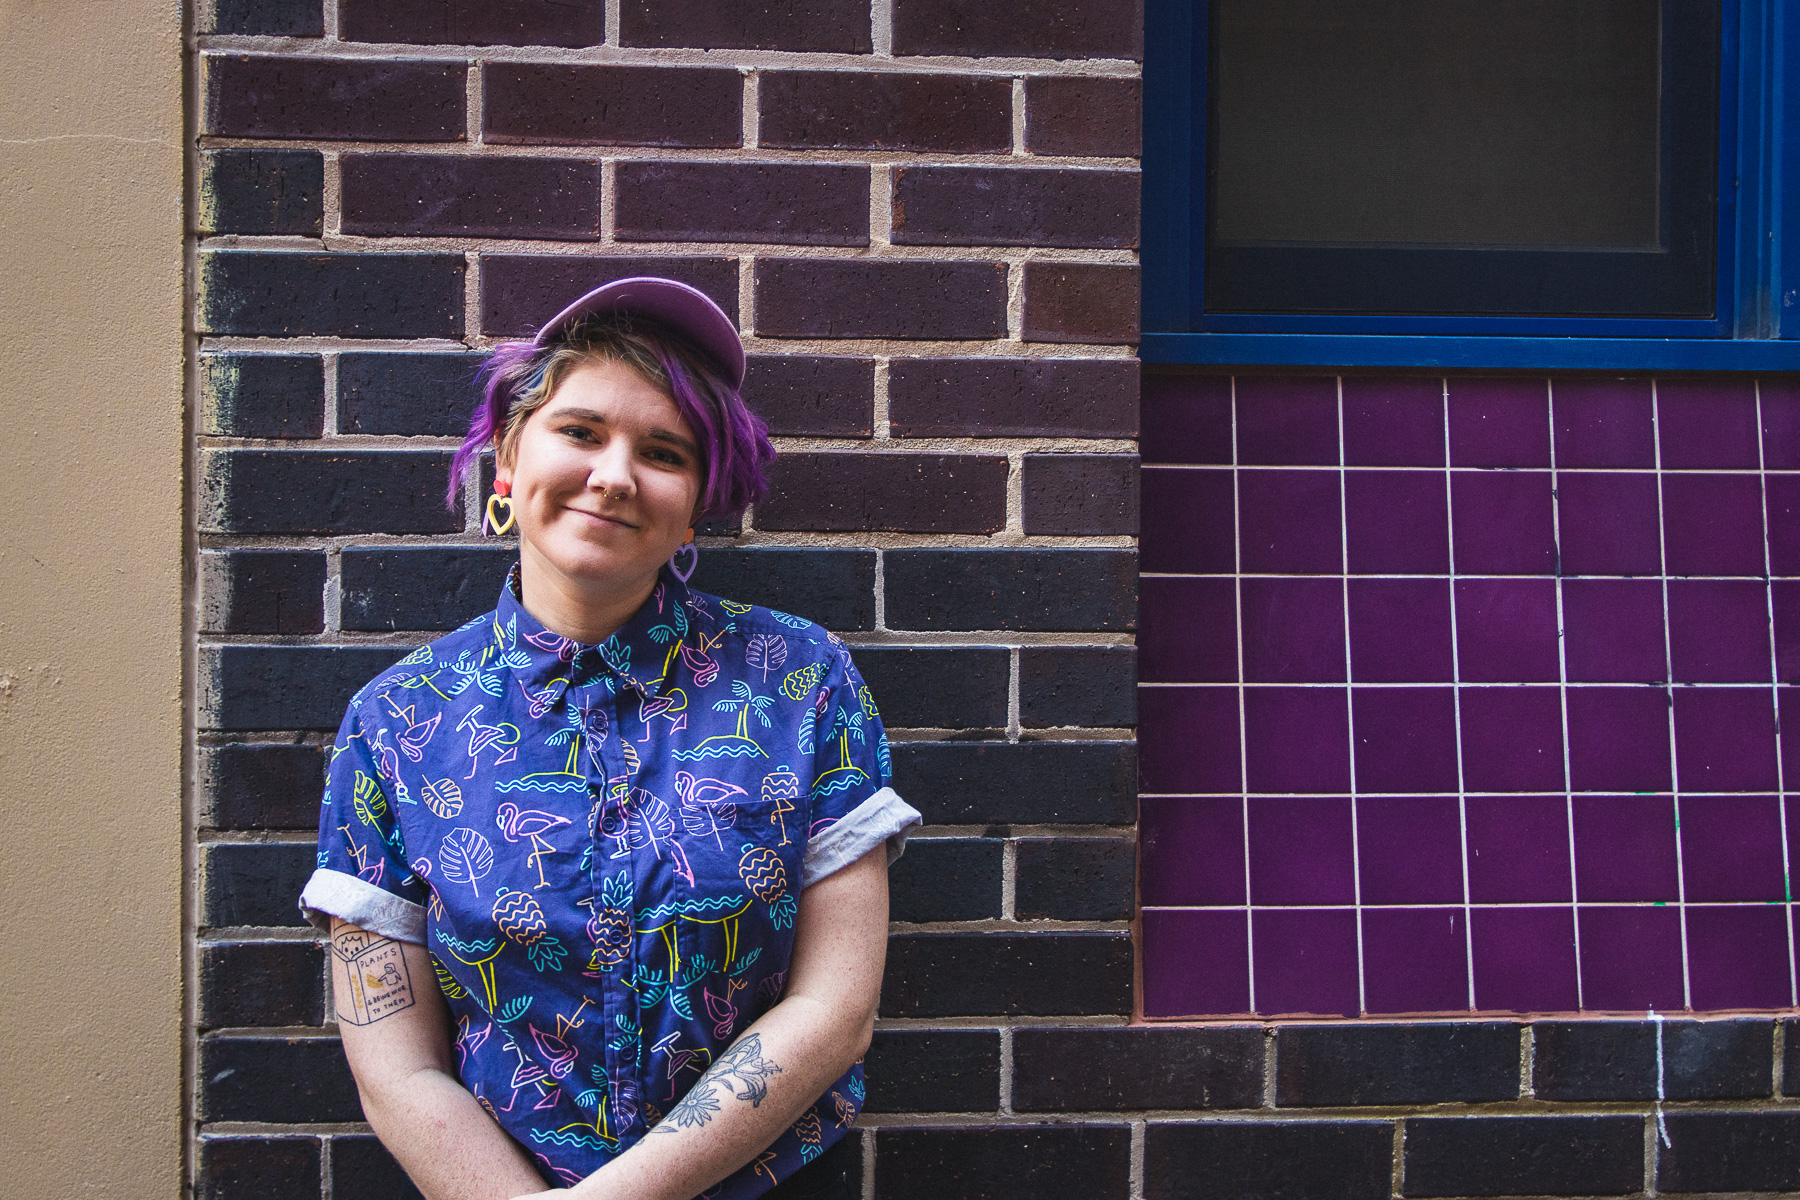 ‘Being queer isn’t just a box, it’s a limitless way to express who you are as a person’